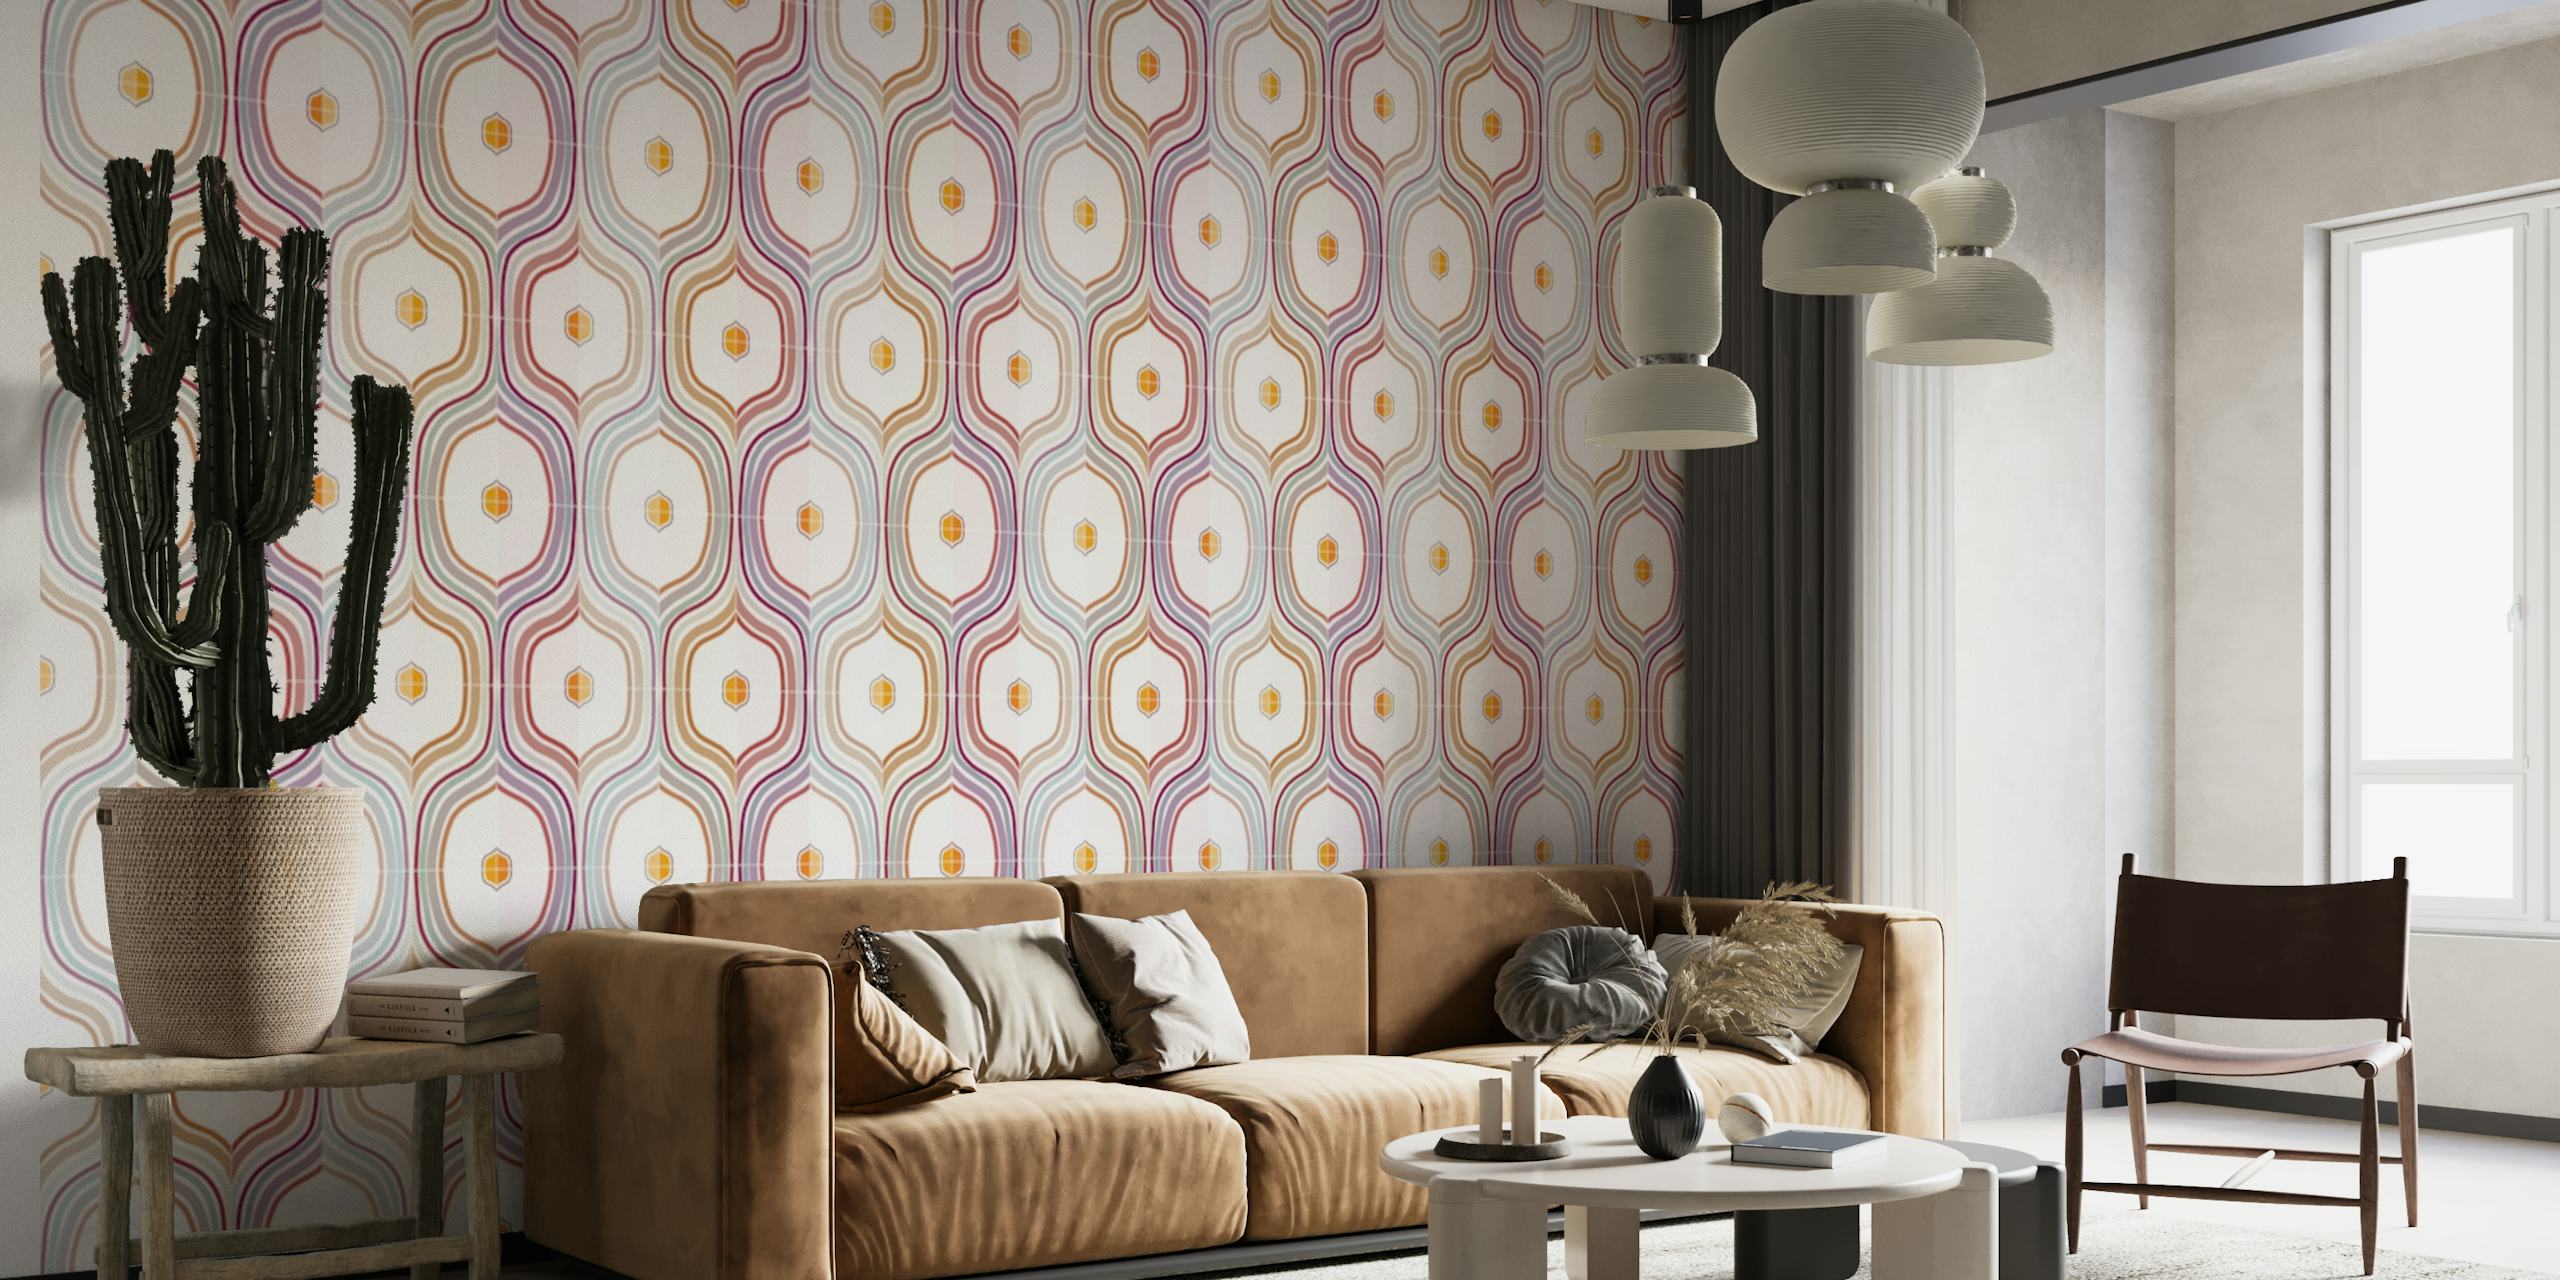 Vintage tile pattern wall mural with geometric shapes in pastel colors